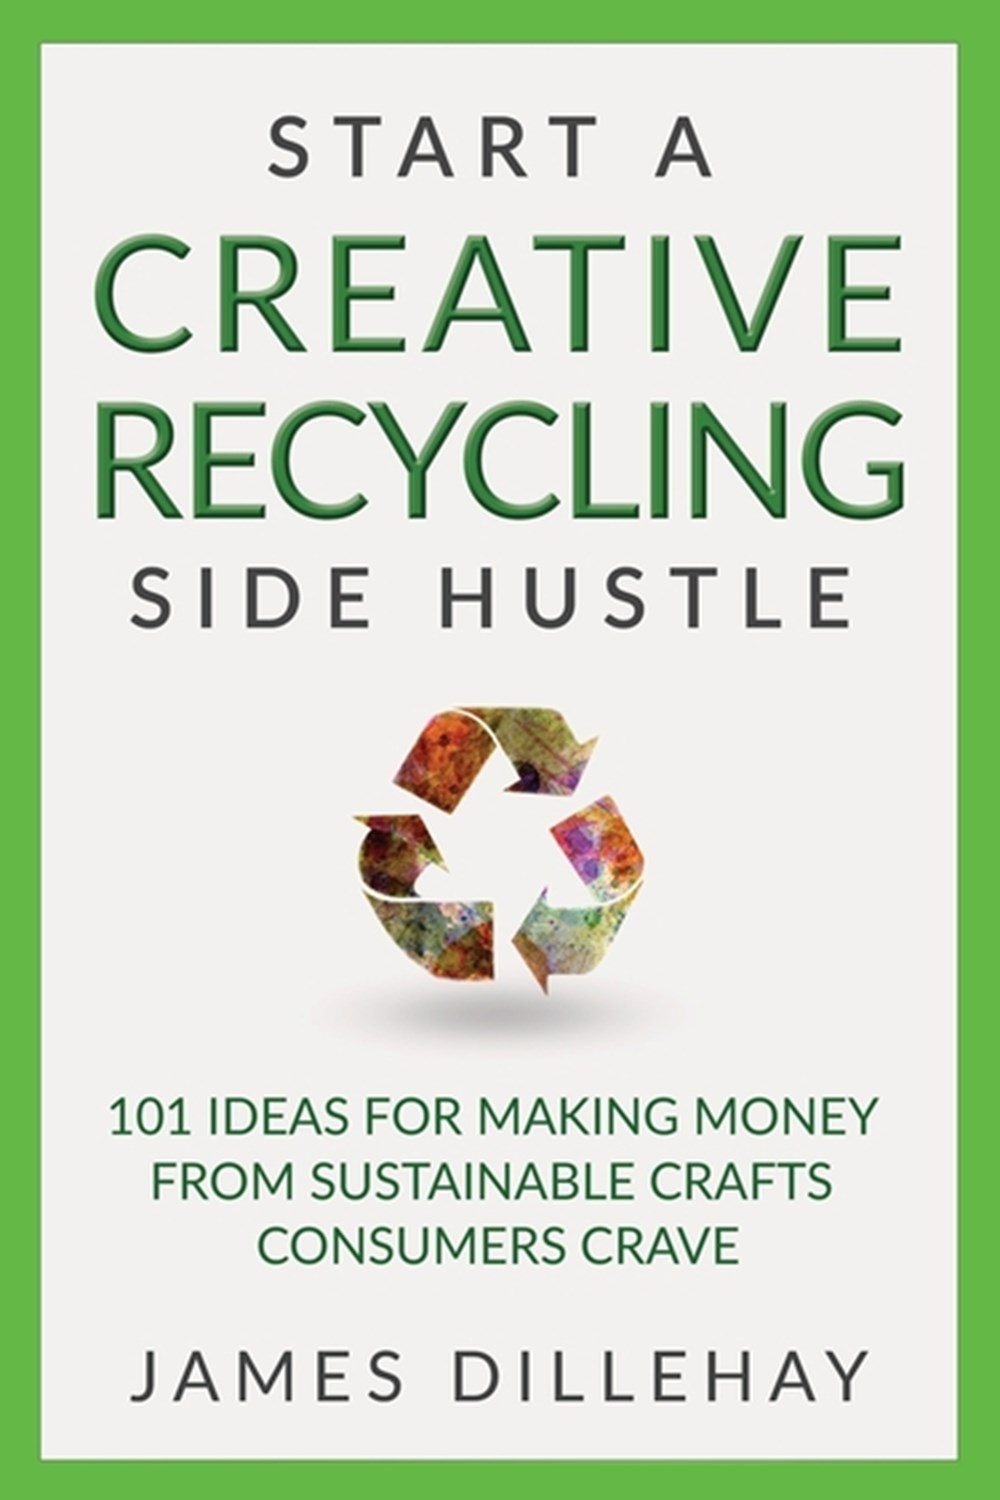 Start a Creative Recycling Side Hustle: 101 Ideas for Making Money from Sustainable Crafts Consumers